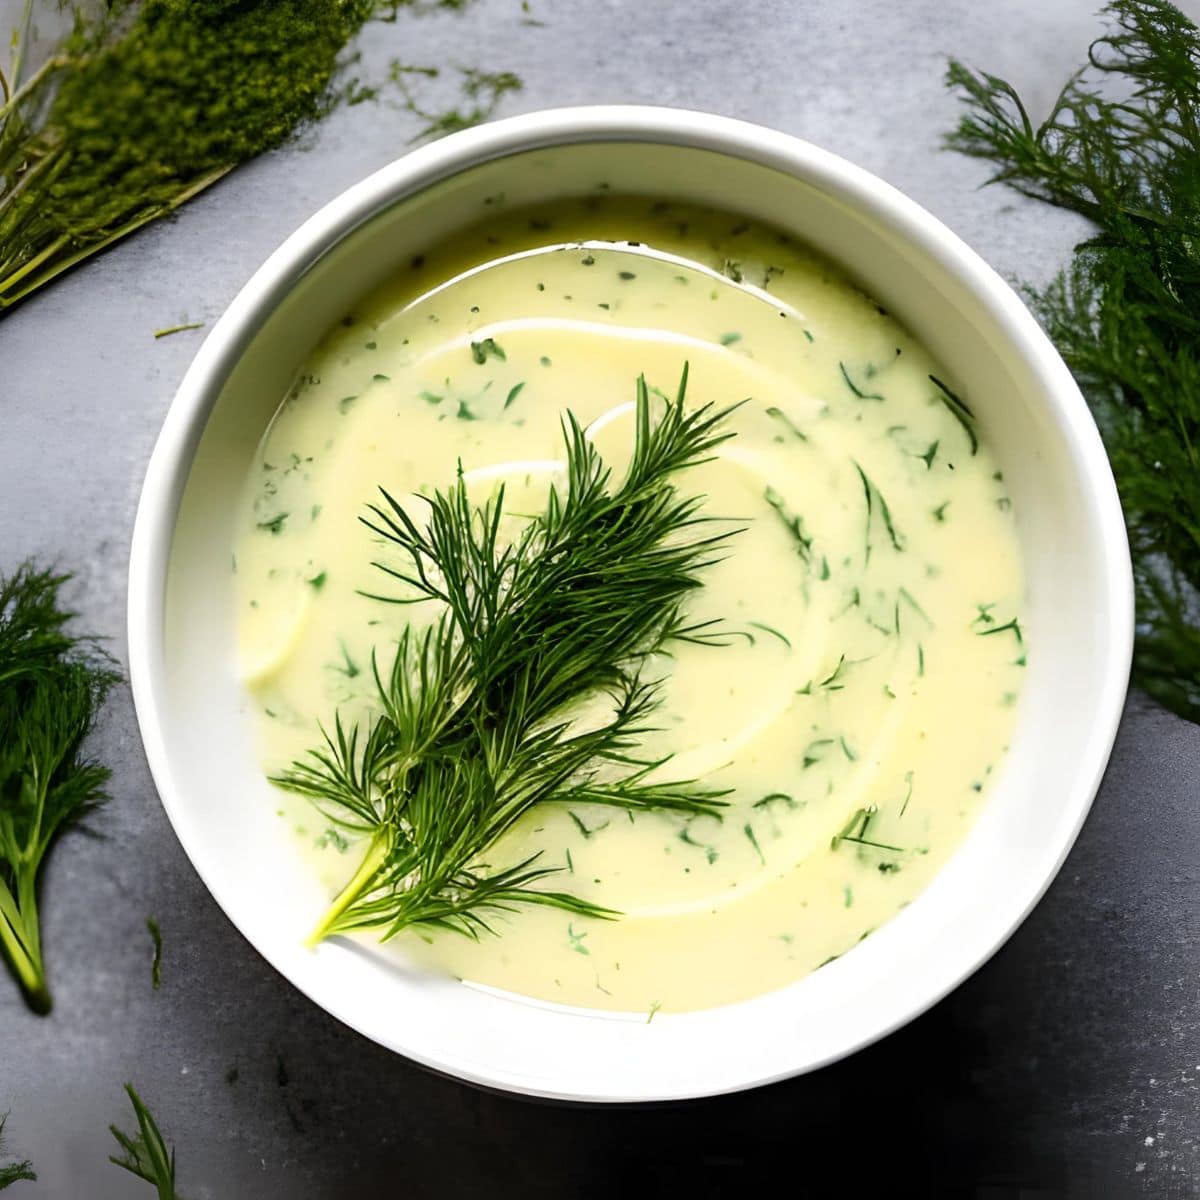 A small bowl of homemade dill butter.